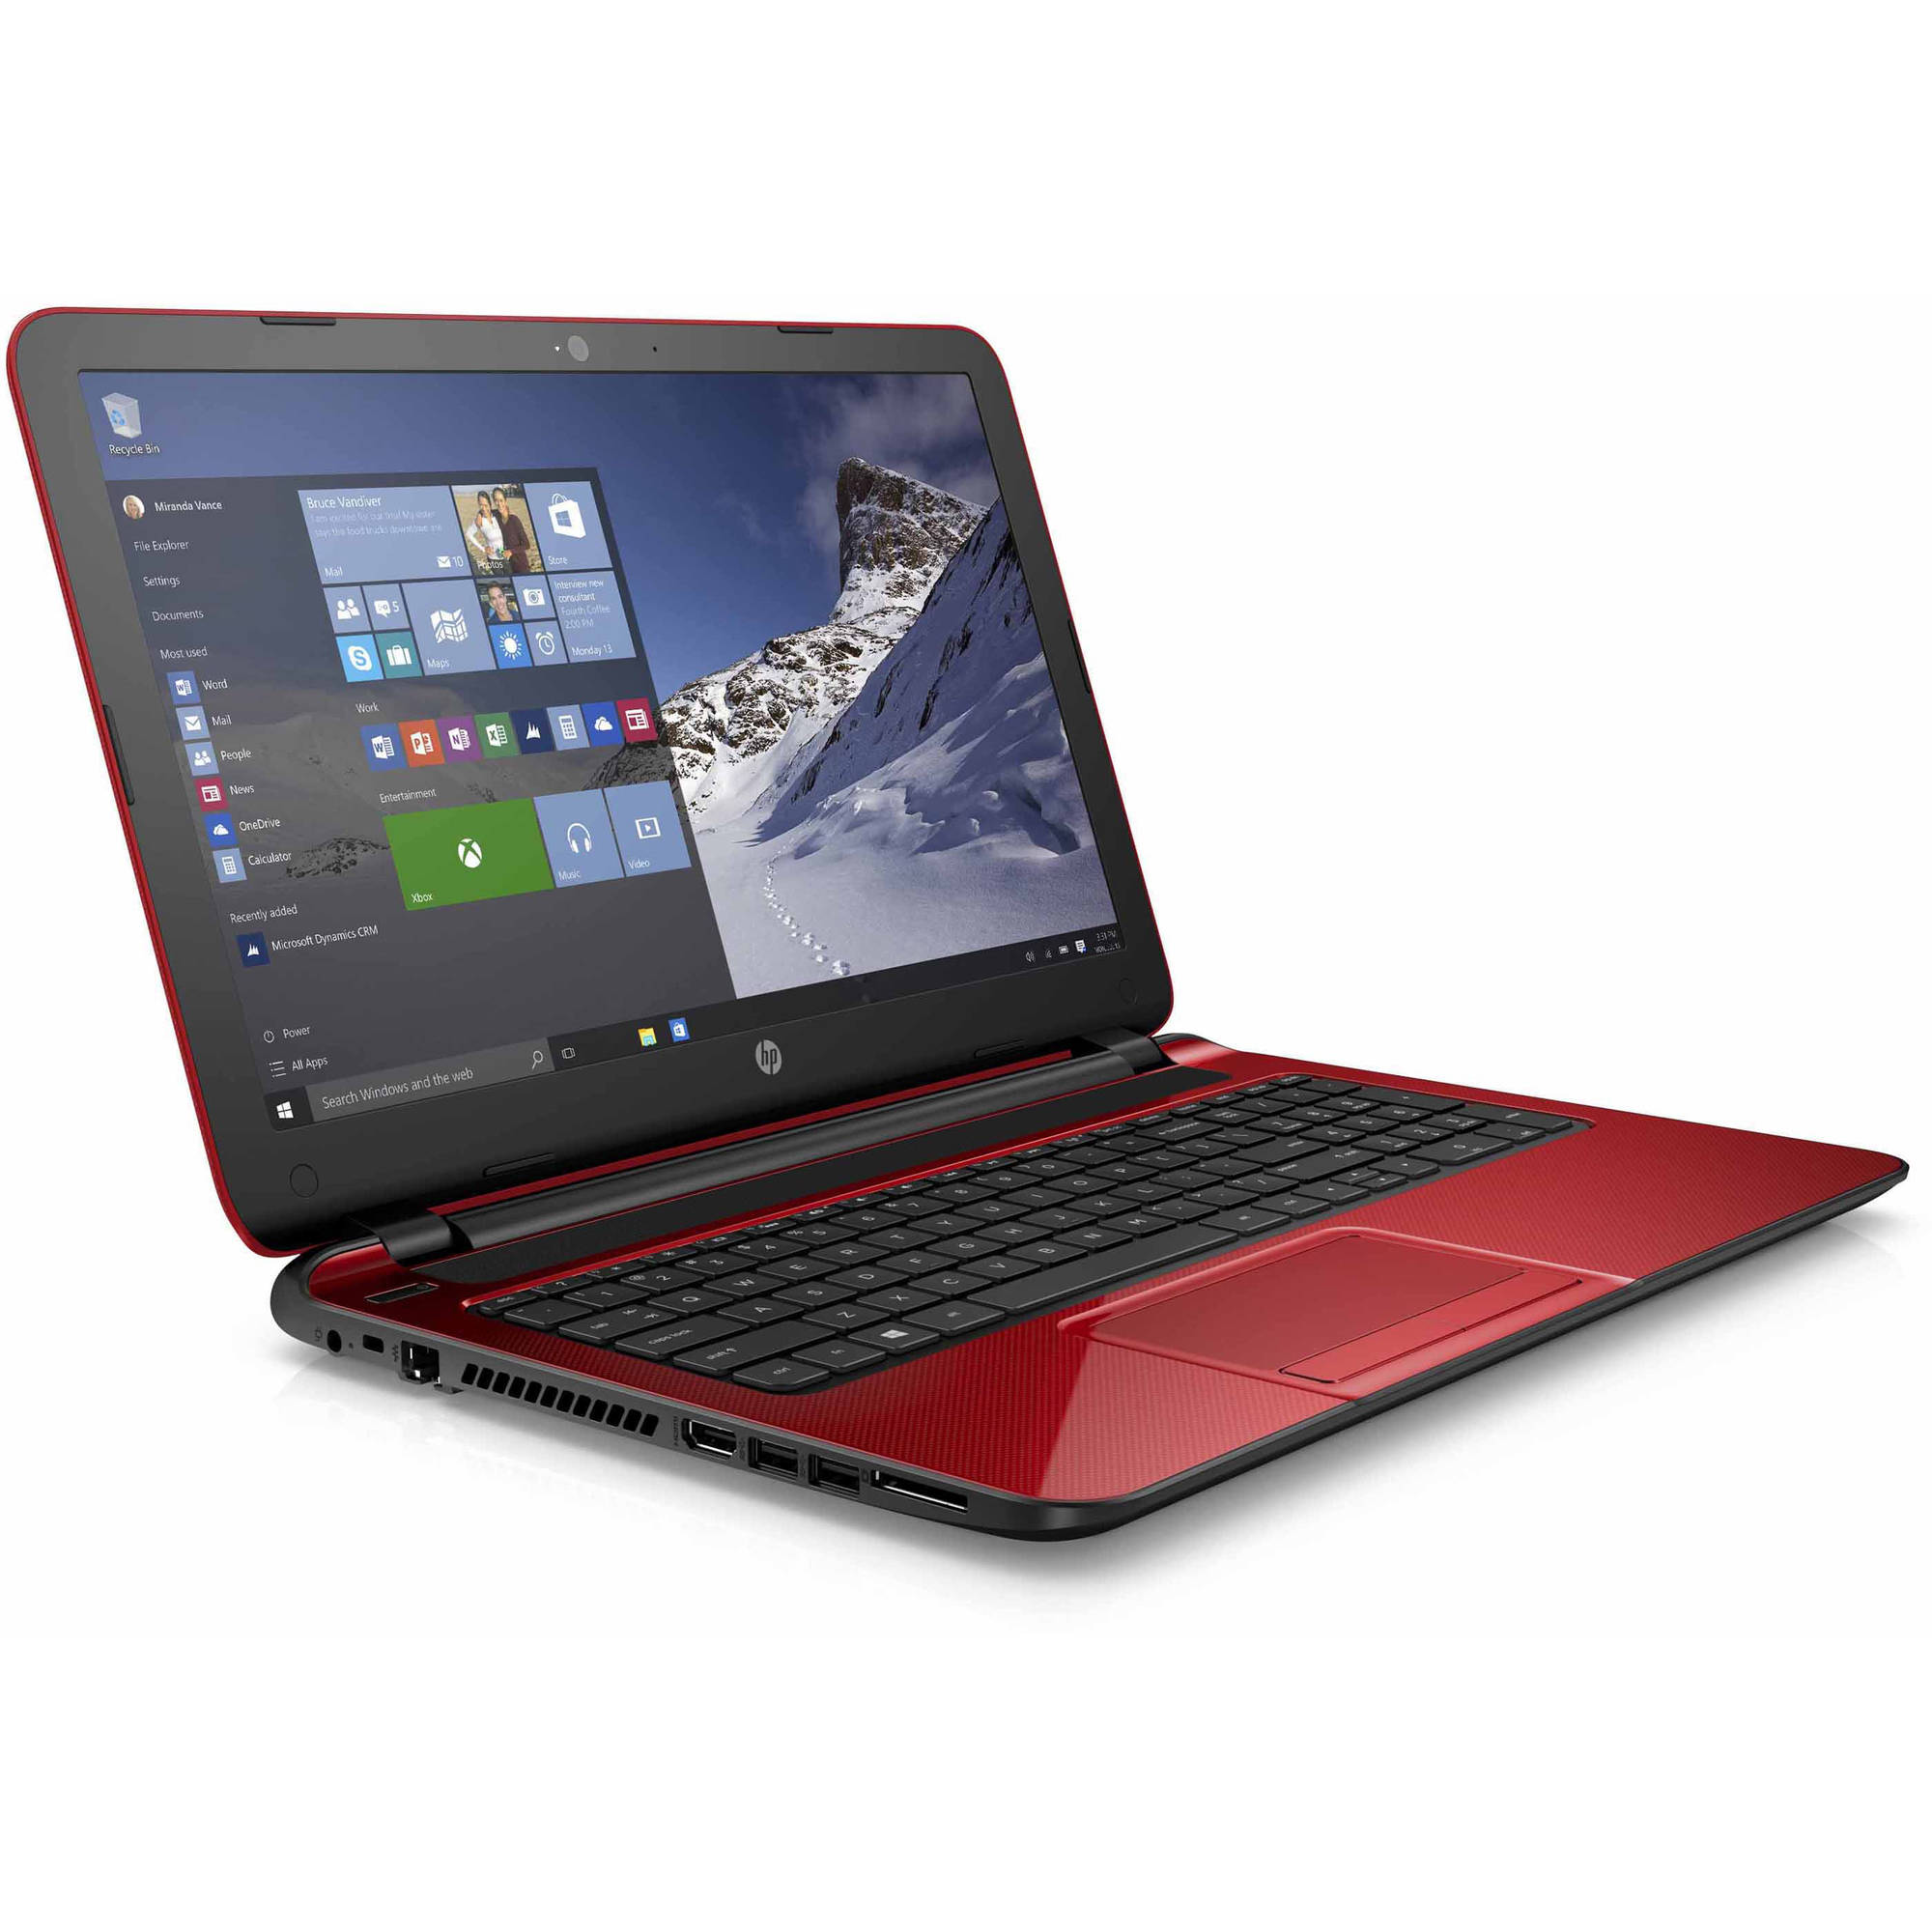 HP Flyer Red 15.6" 15-f272wm Laptop PC with Intel Pentium N3540 Processor, 4GB Memory, 500GB Hard Drive and Windows 10 Home - image 1 of 4